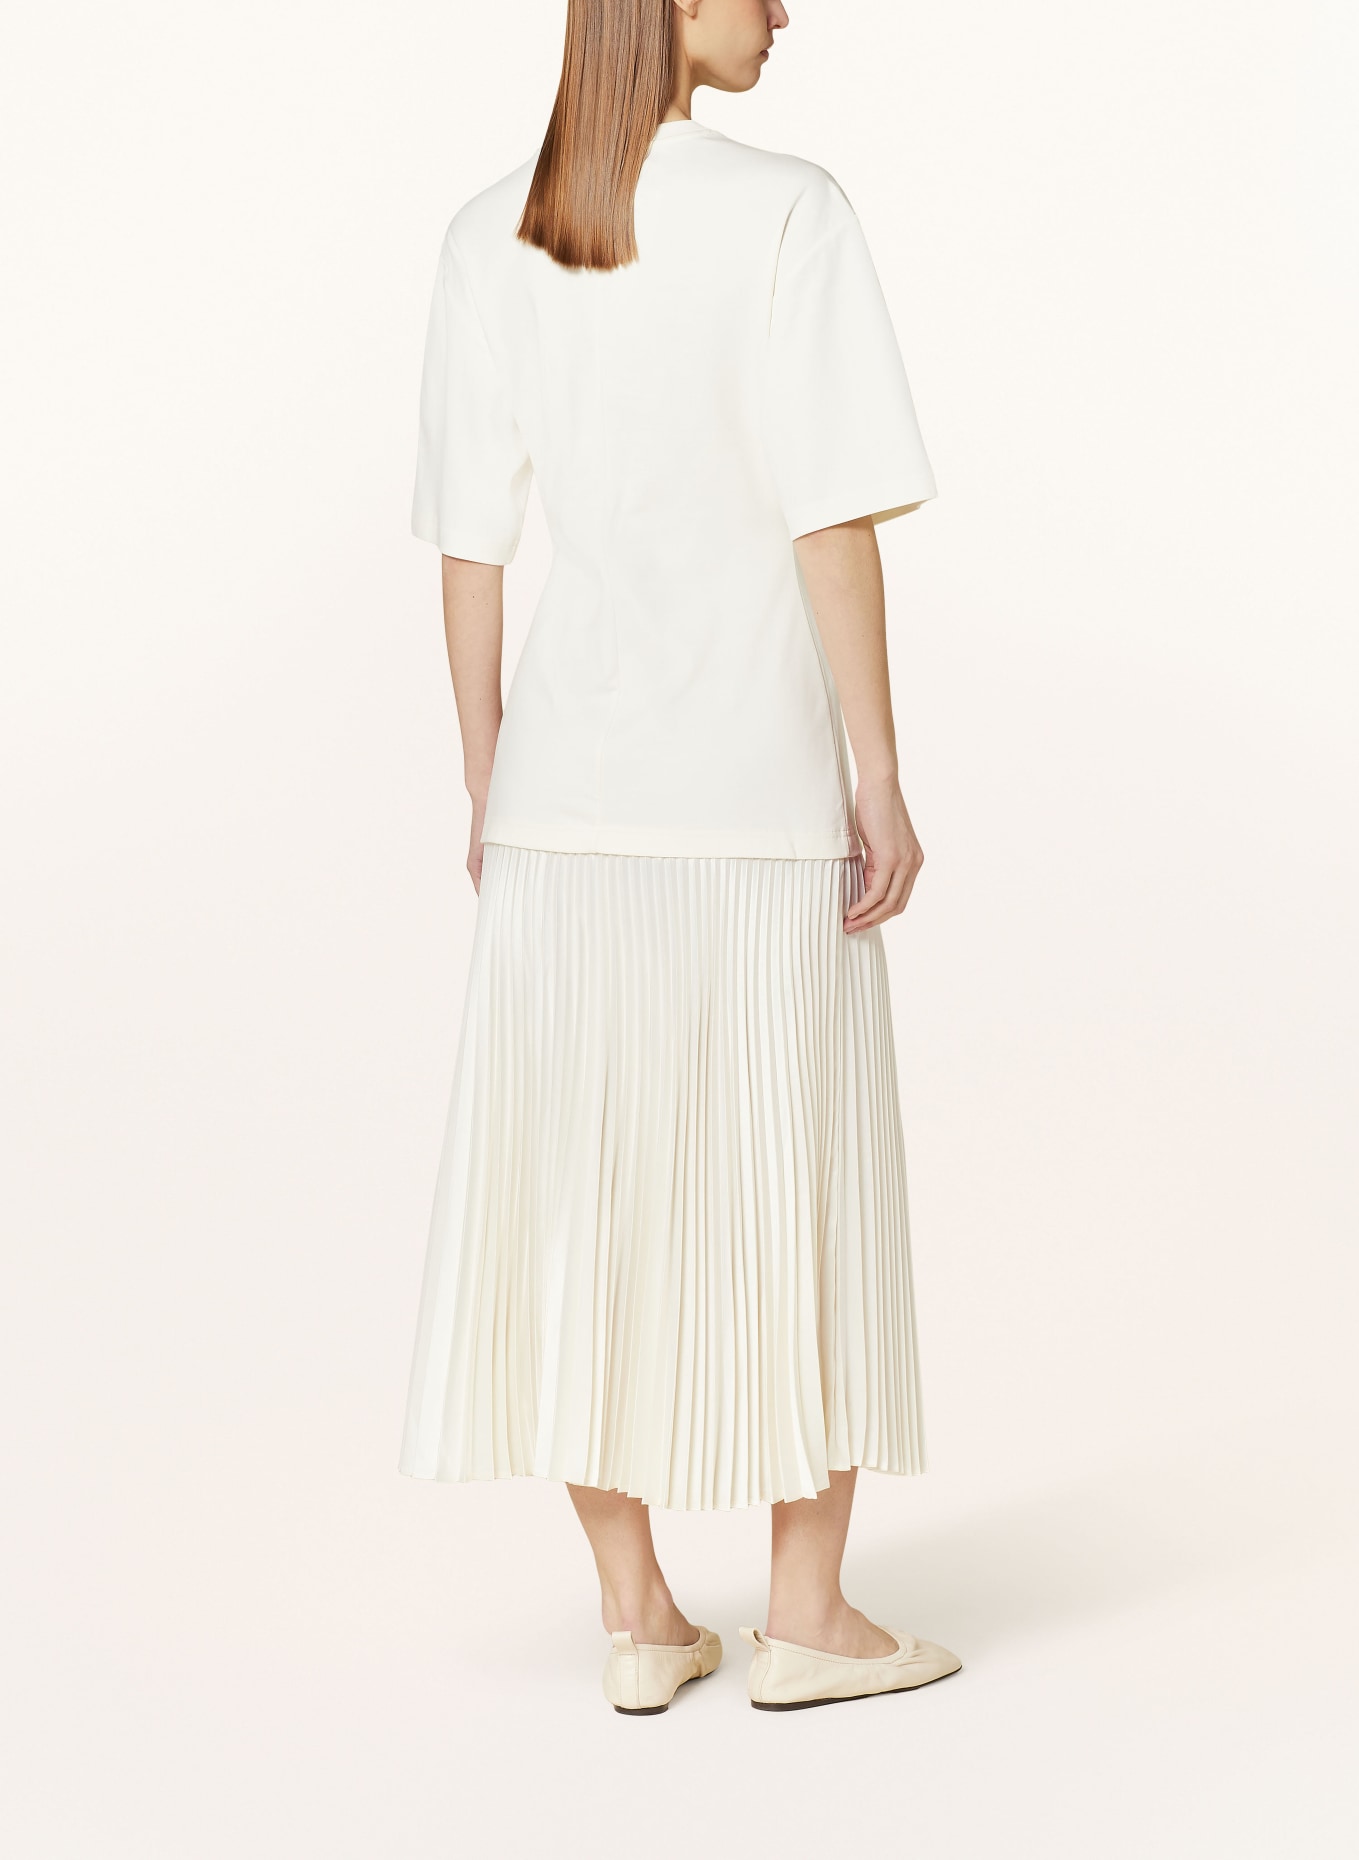 COS Dress in mixed materials, Color: WHITE (Image 3)